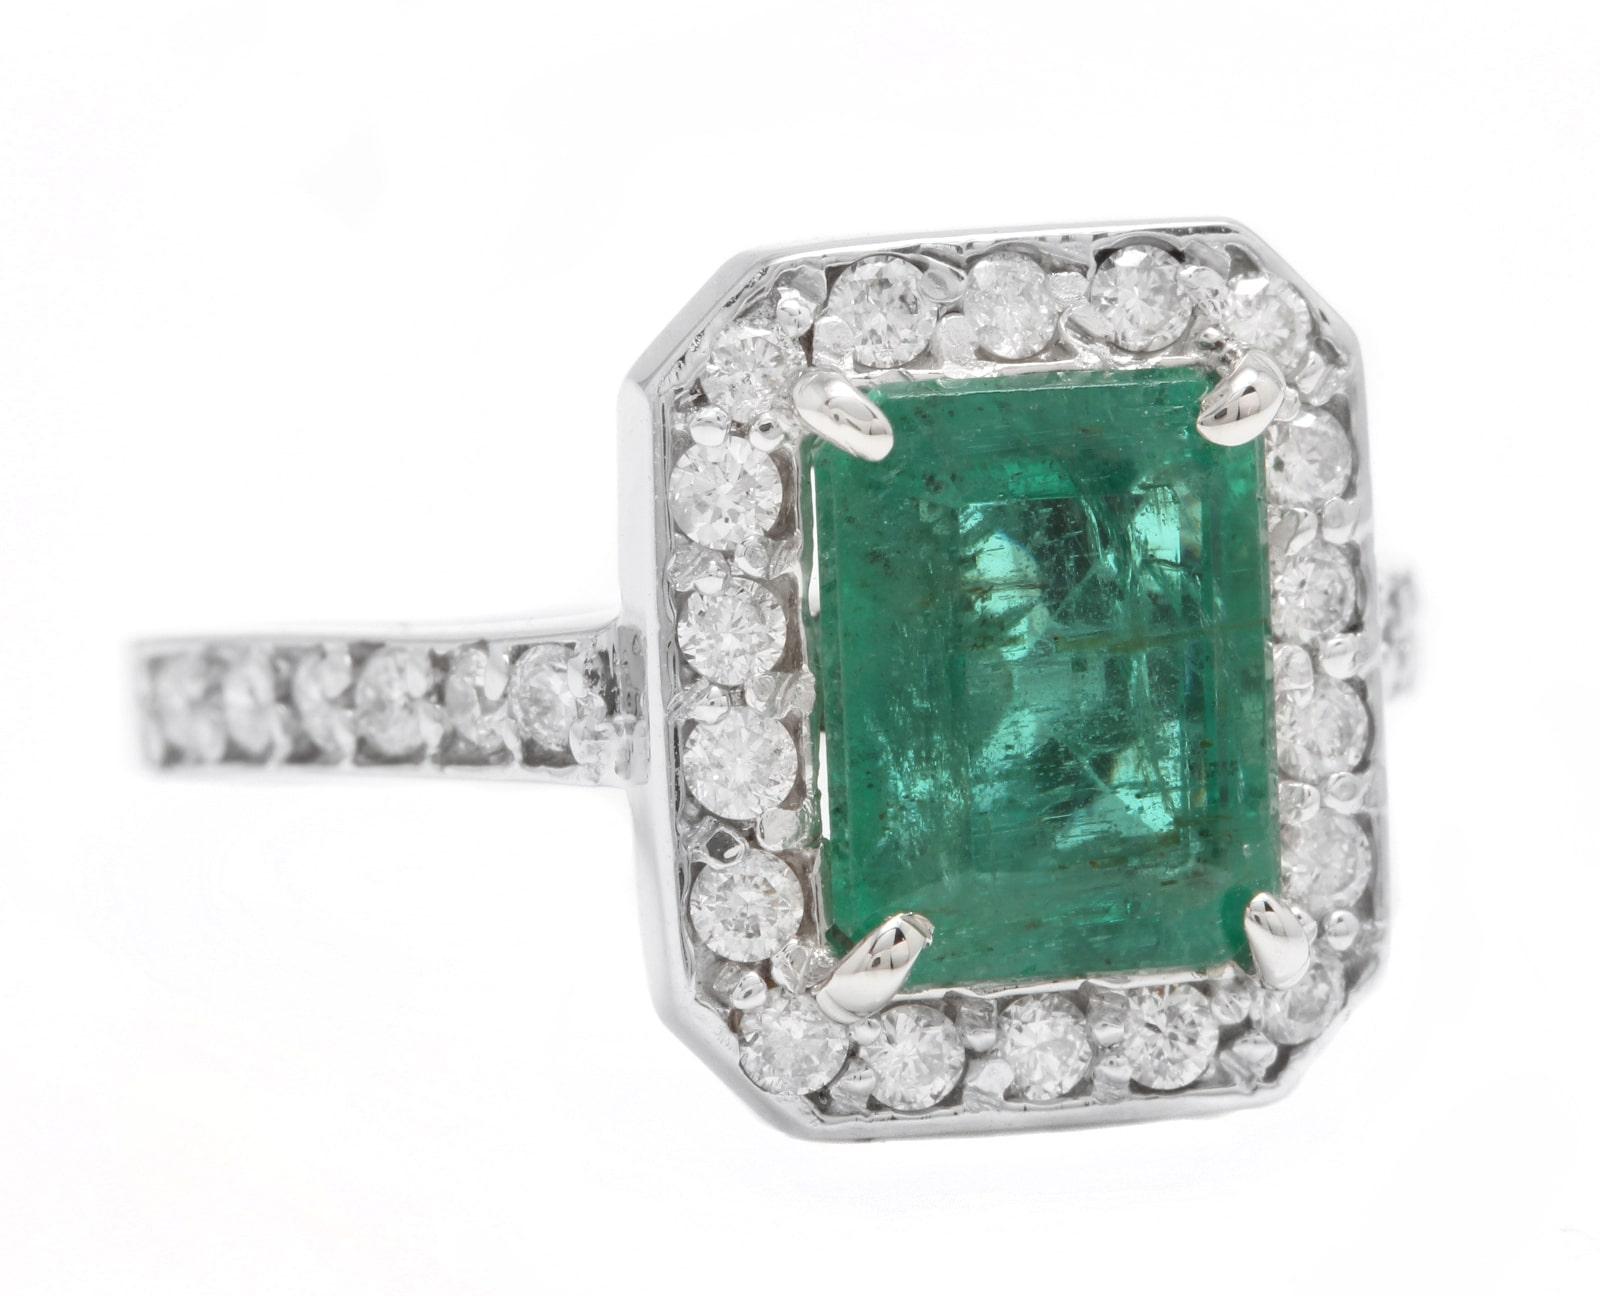 3.60 Carats Natural Emerald and Diamond 14K Solid White Gold Ring

Suggested Replacement Value: Approx. $6,000.00

Total Natural Green Emerald Weight is: Approx. 3.00 Carats (transparent)

Emerald Measures: Approx. 9 x 7mm

Emerald Treatment: